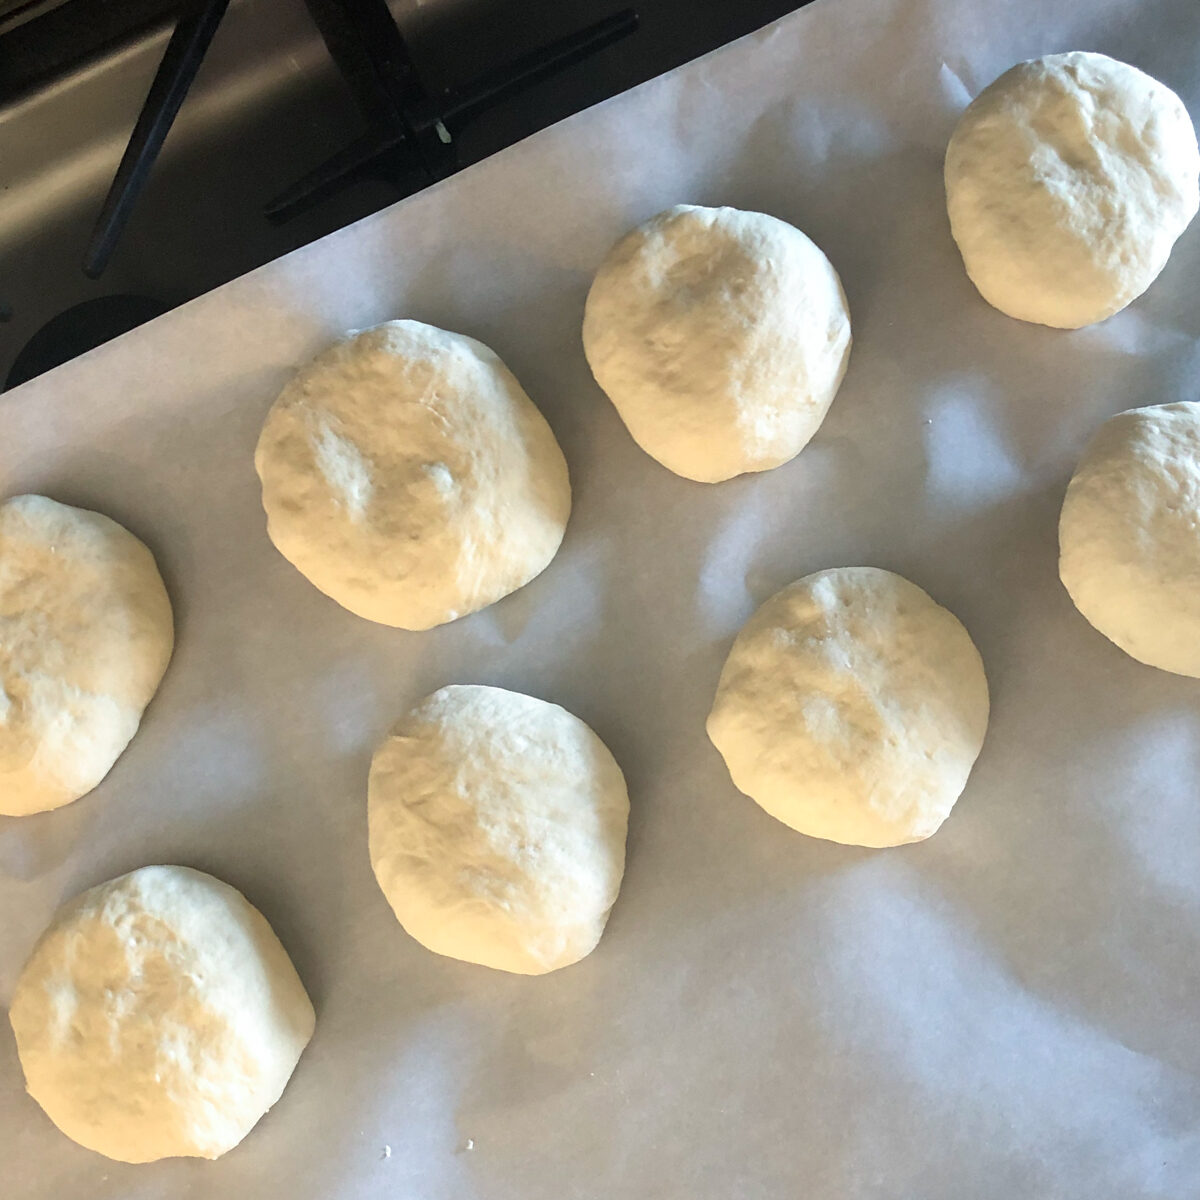 Pizza dough balls ready for the Ooni oven